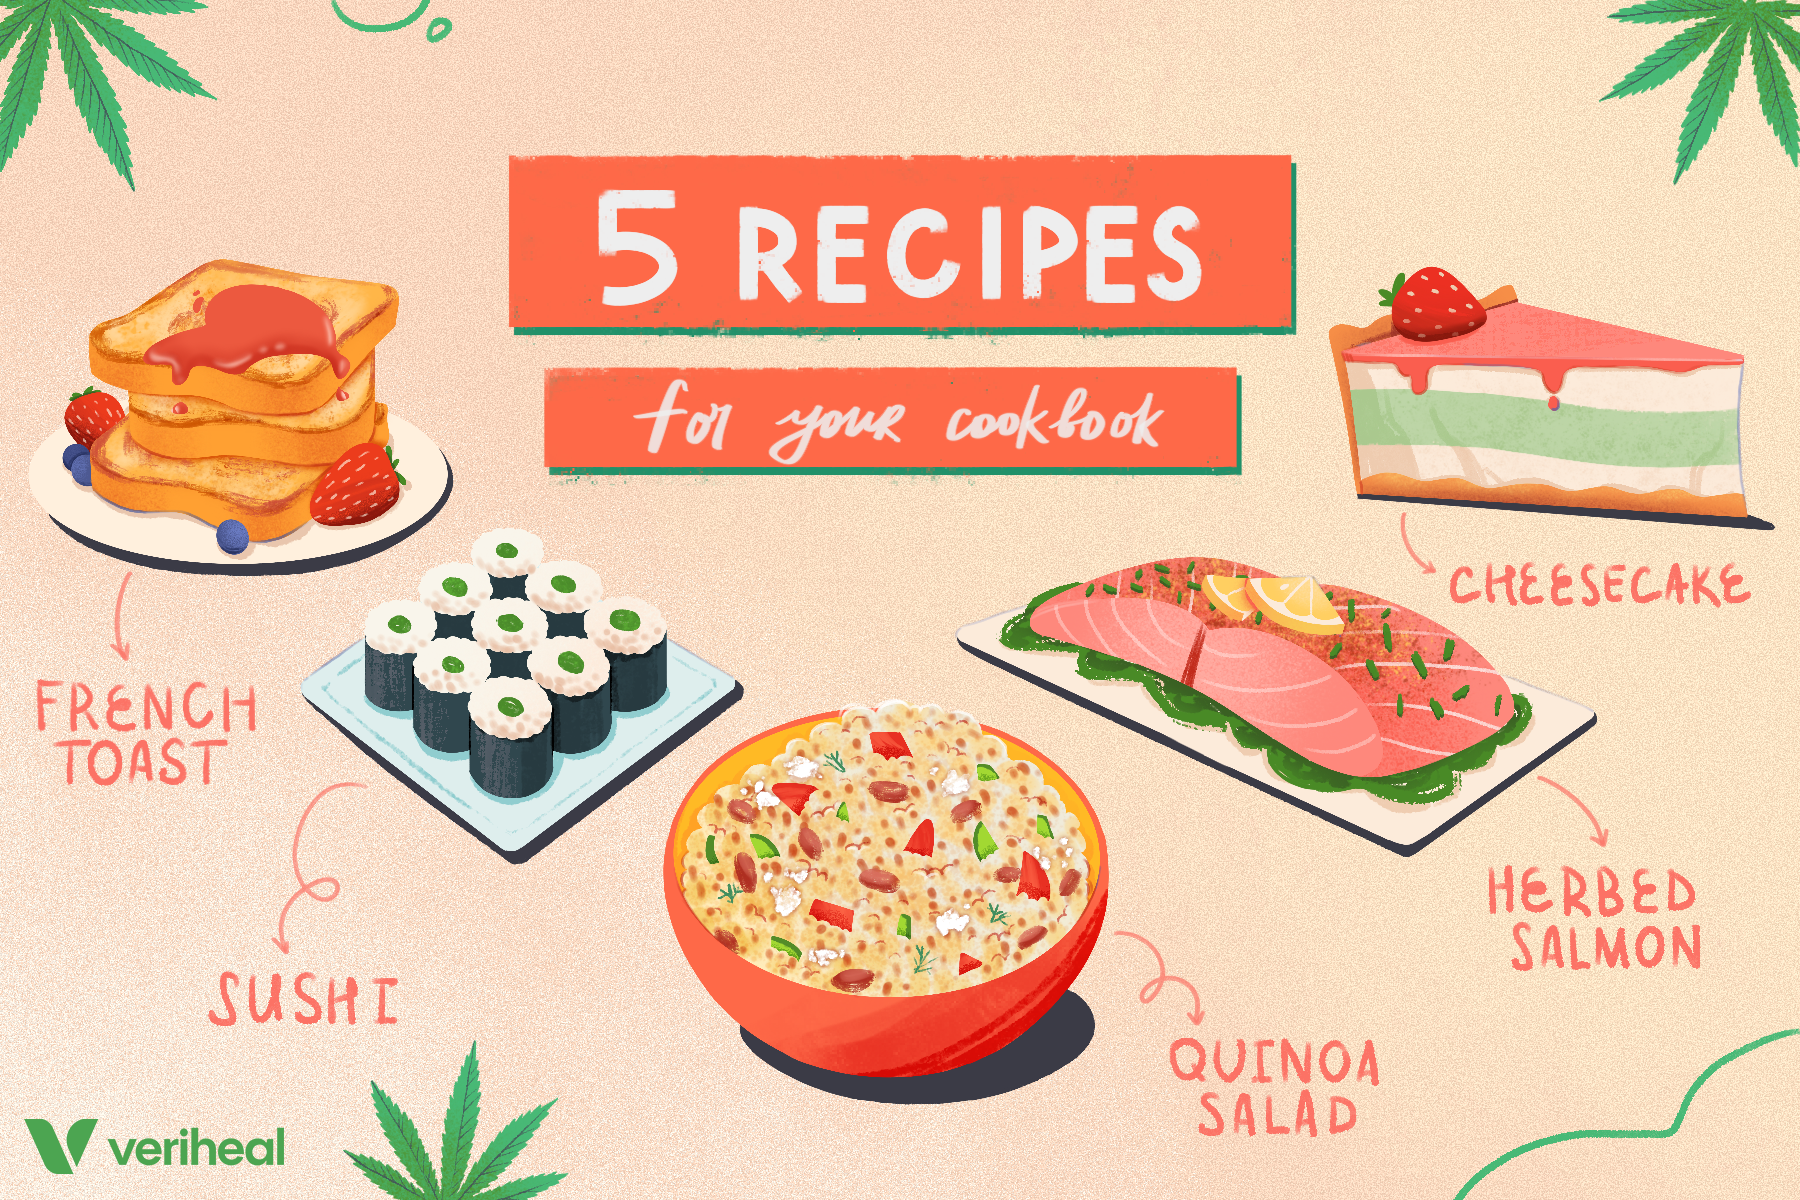 5 Recipes Worth Adding to Your Cannabis Cookbook